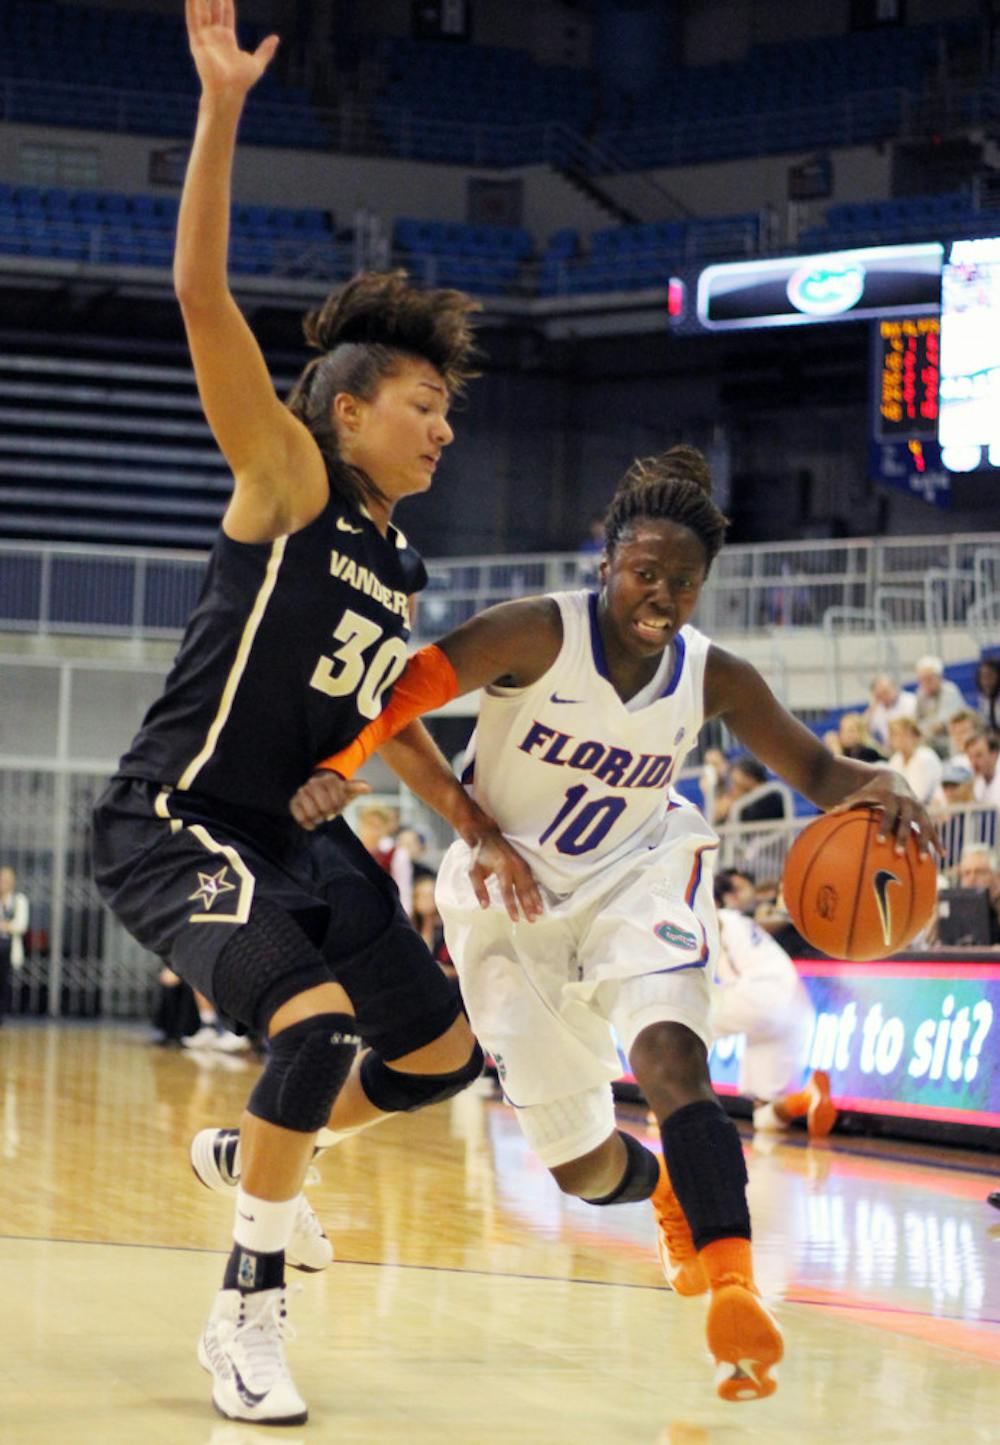 <p align="justify">Jaterra Bonds (10) drives the lane during Florida’s 68-57 loss to Vanderbilt on Feb. 21 in the O’Connell Center.</p>